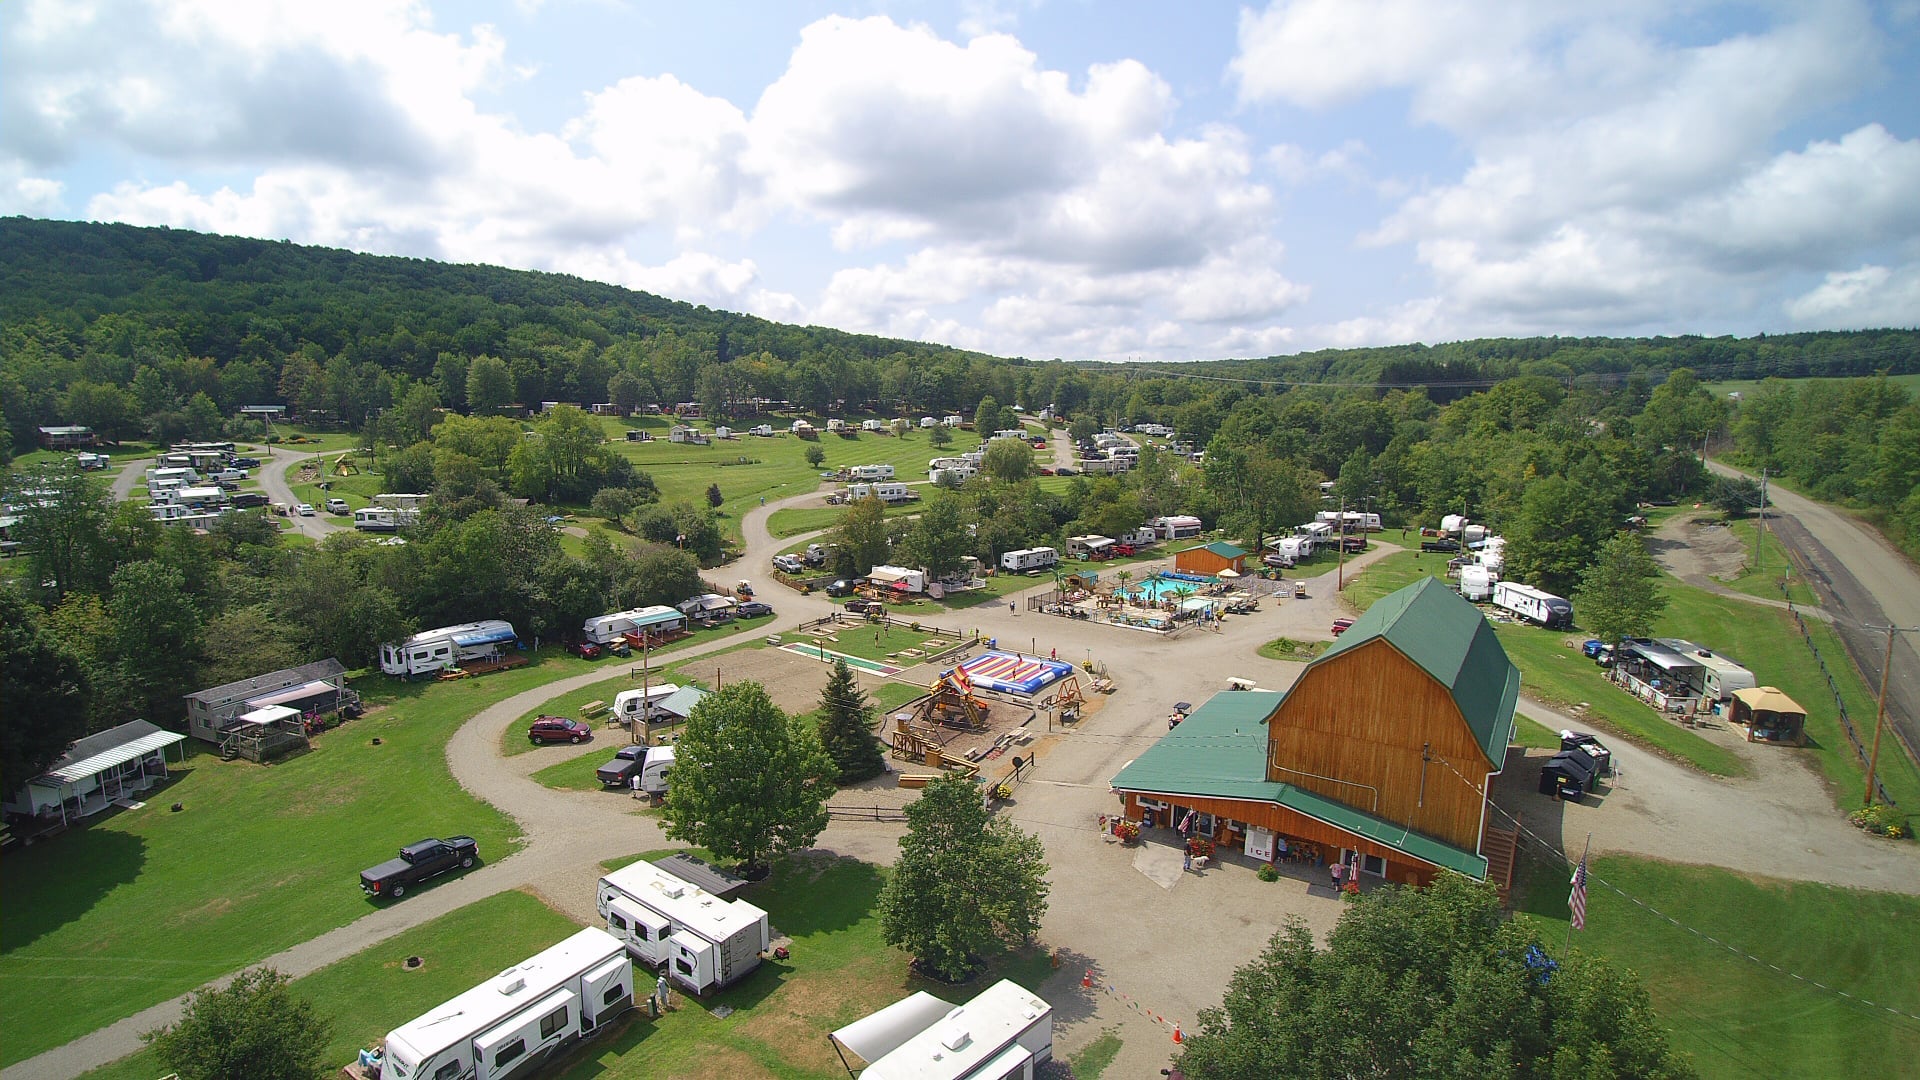 Drone image of Triple R Camping Resort